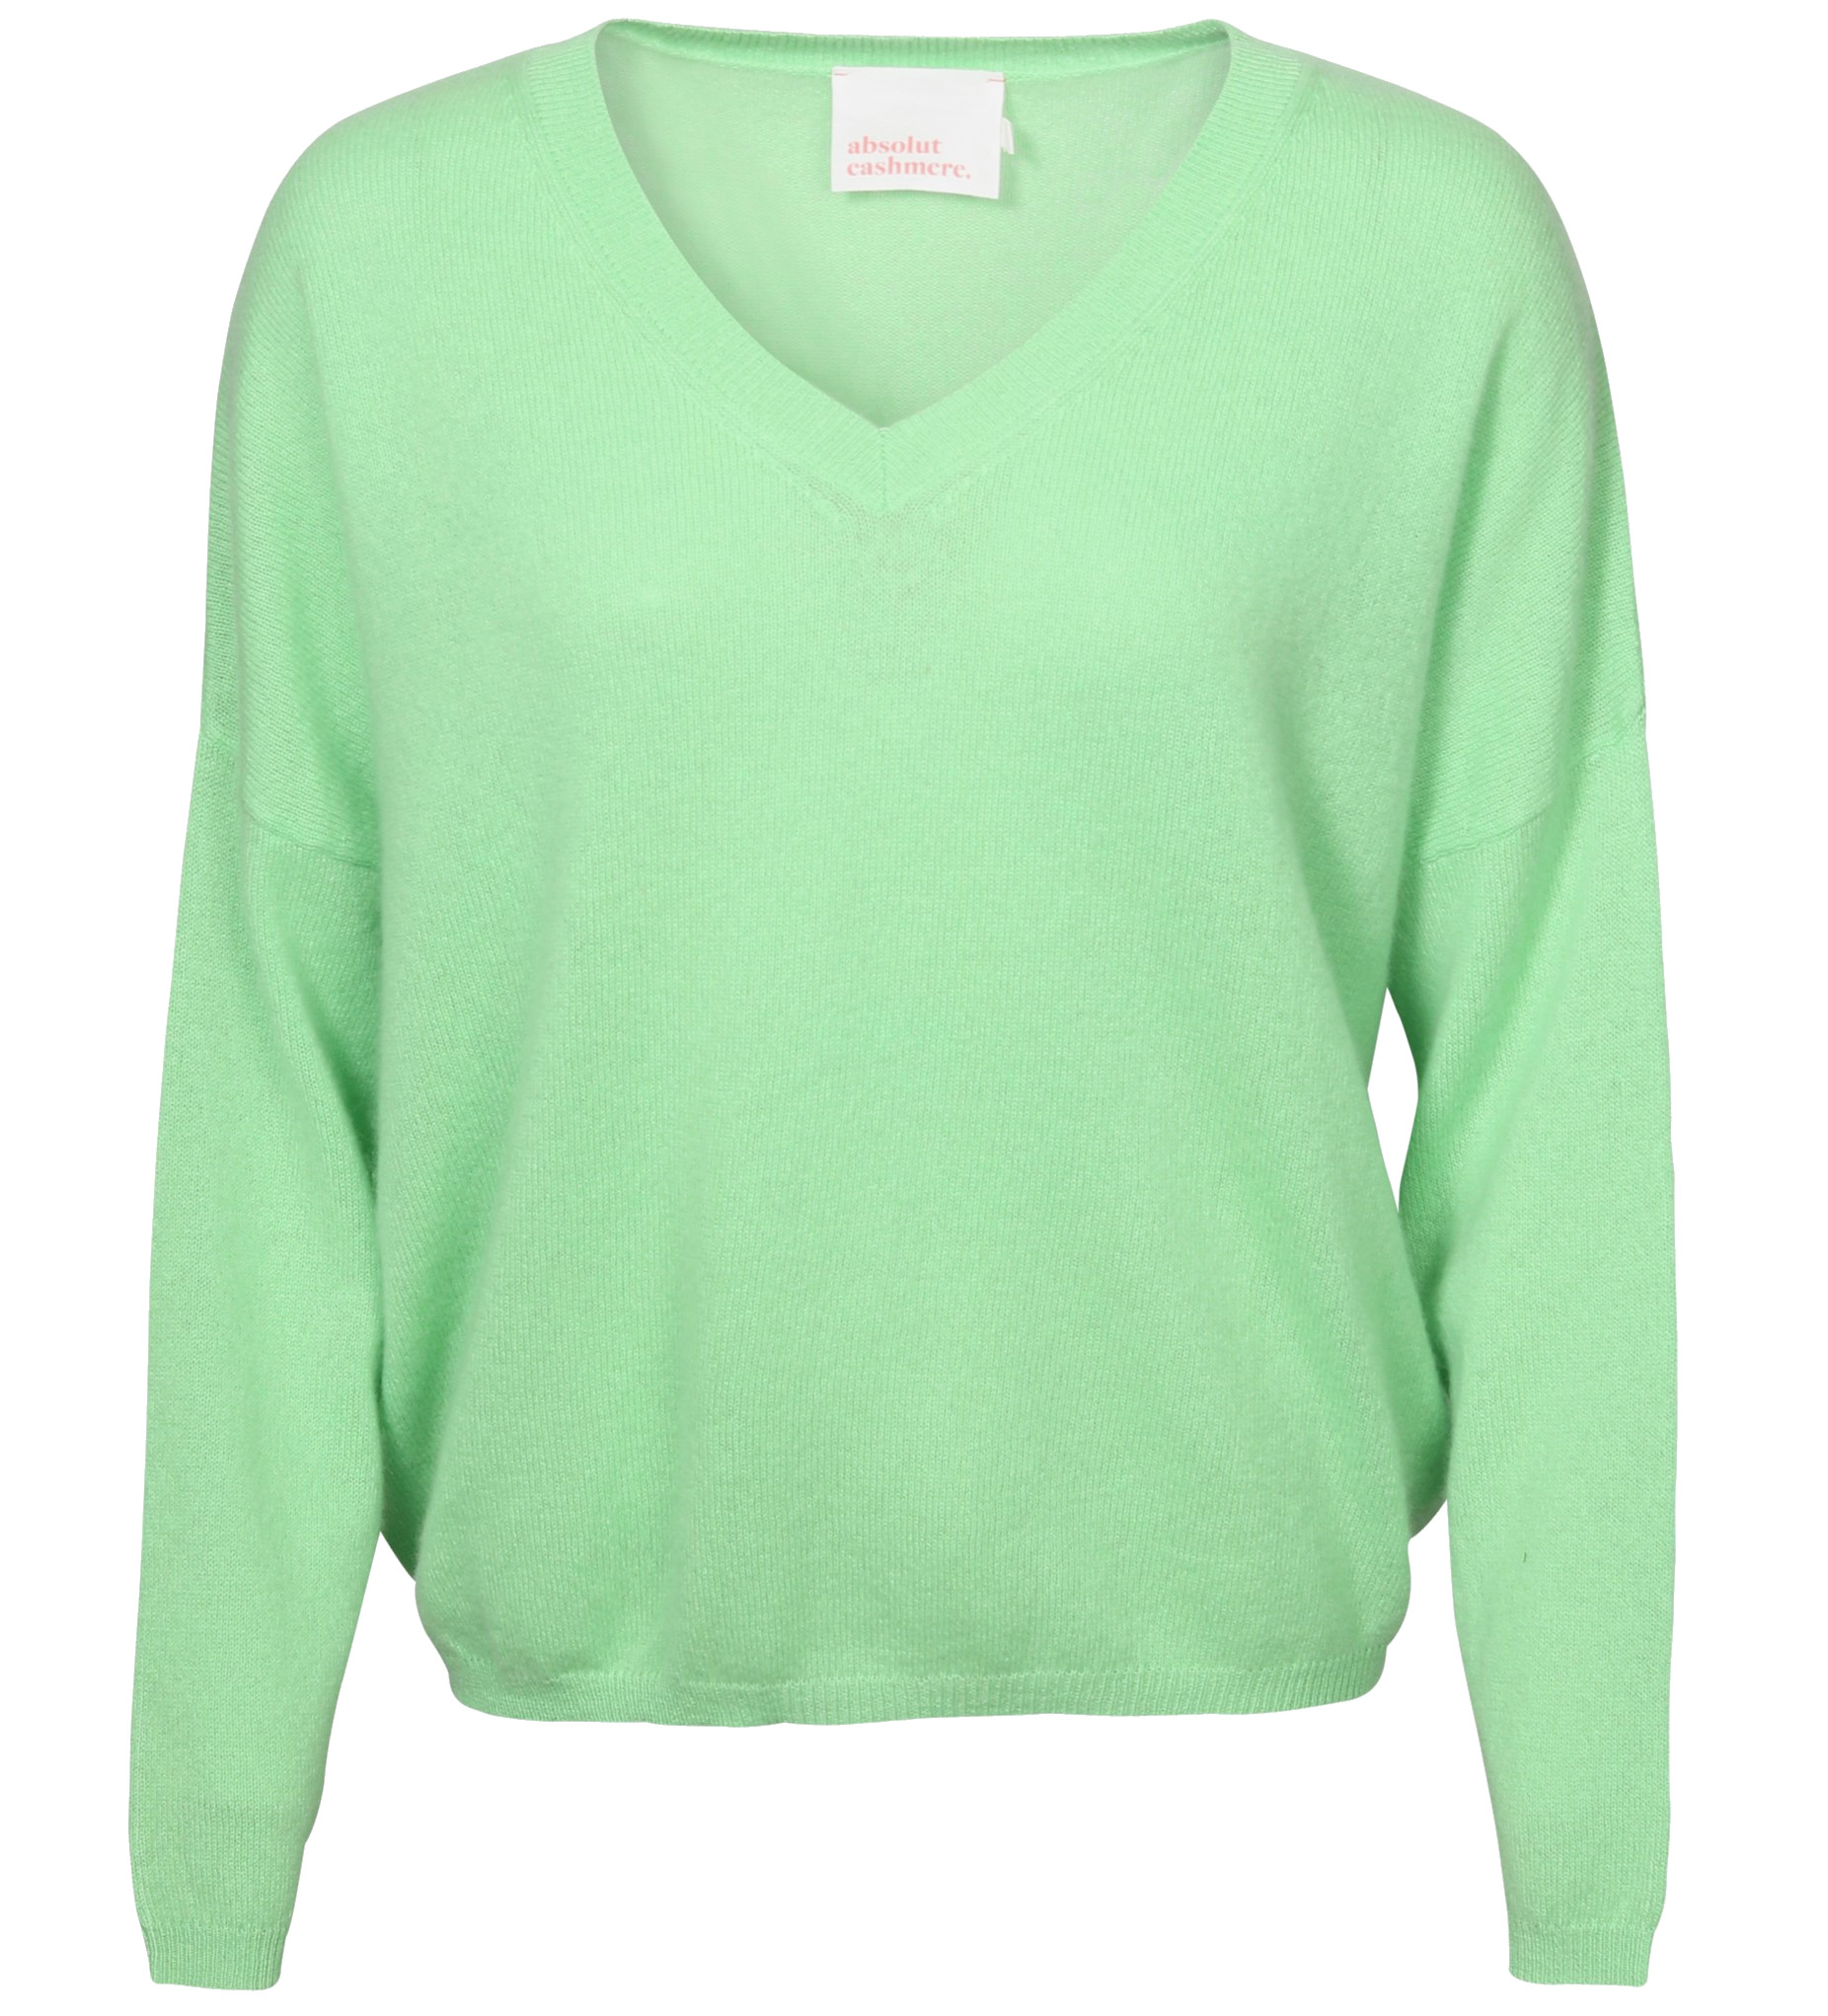 ABSOLUT CASHMERE V-Neck Sweater Alicia in Light Green L